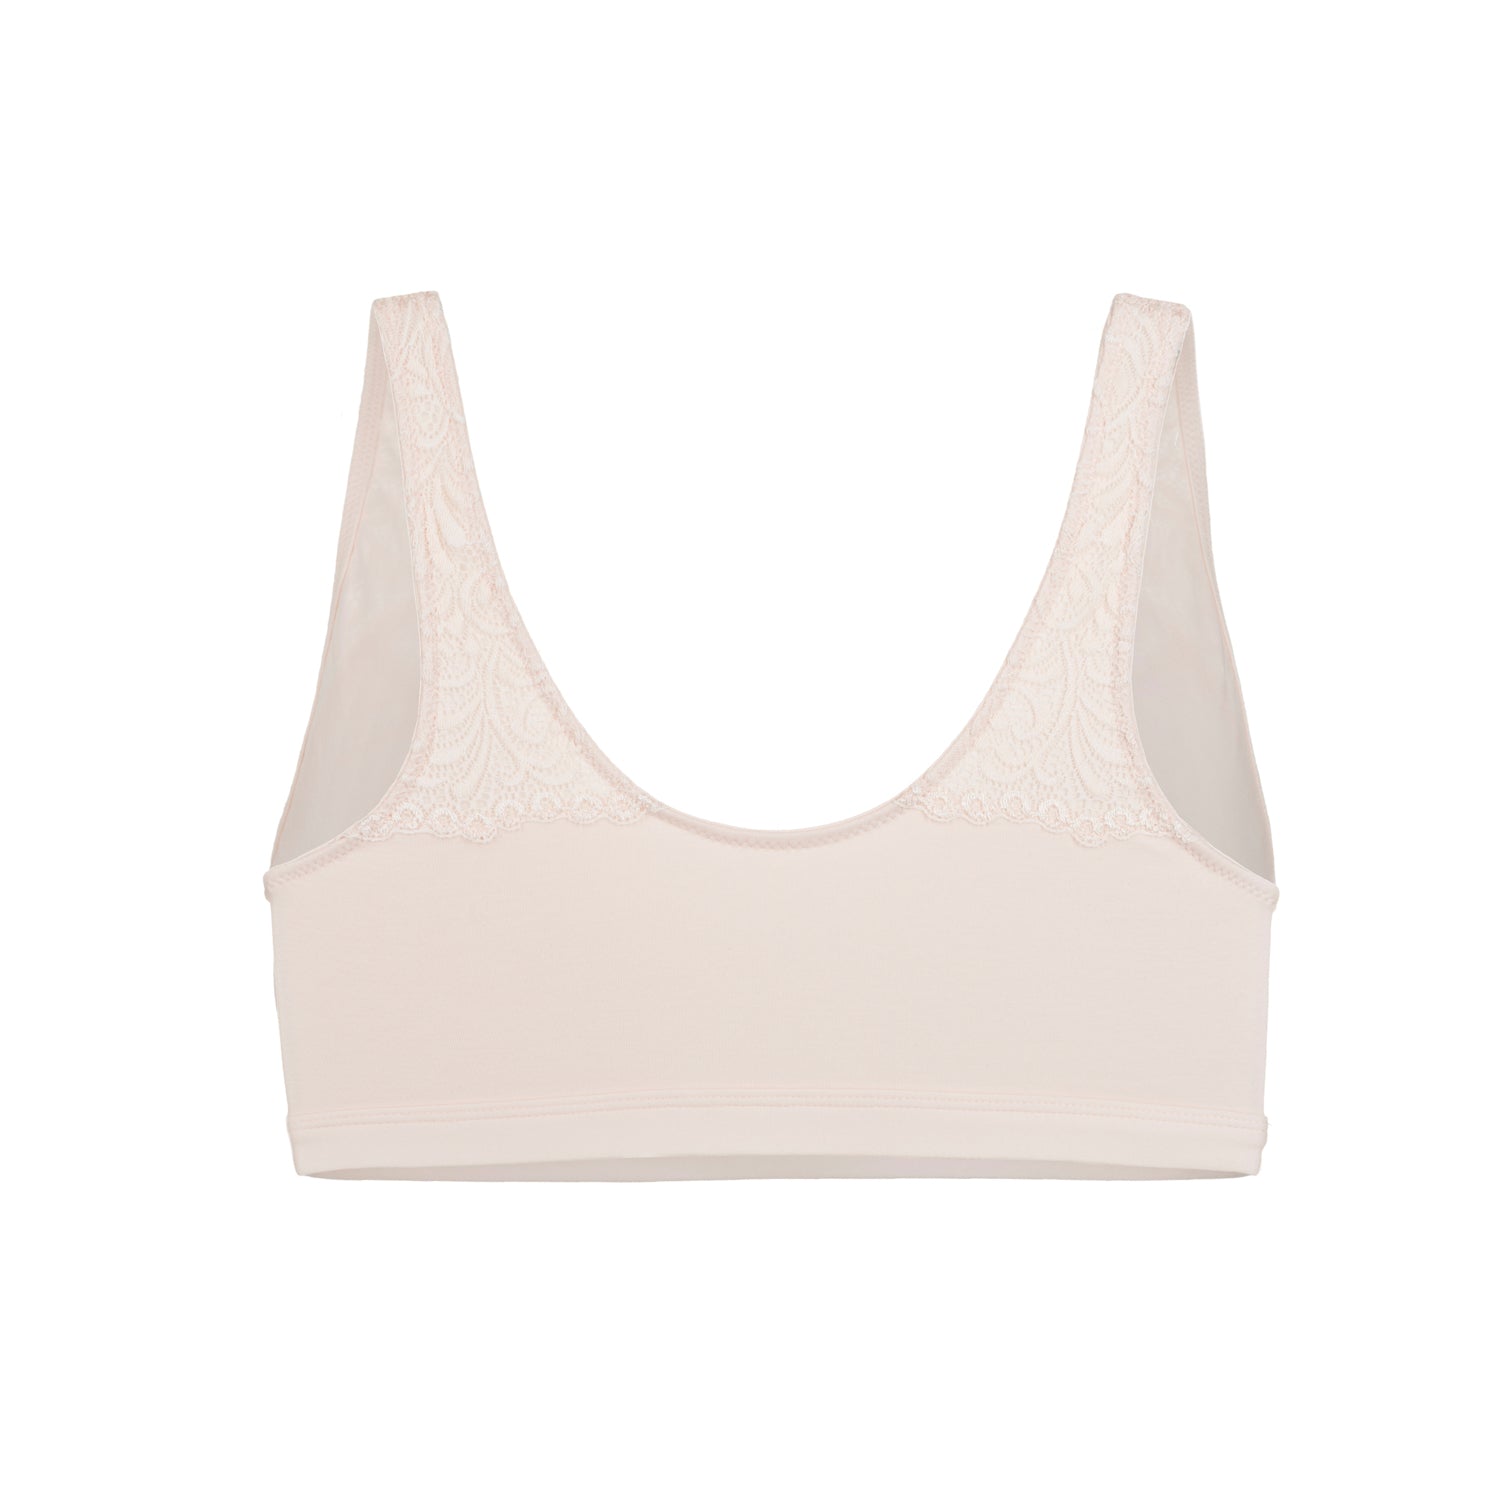 Buy Sparklesandsatin White Pure Cotton Bra for Hot and Humid